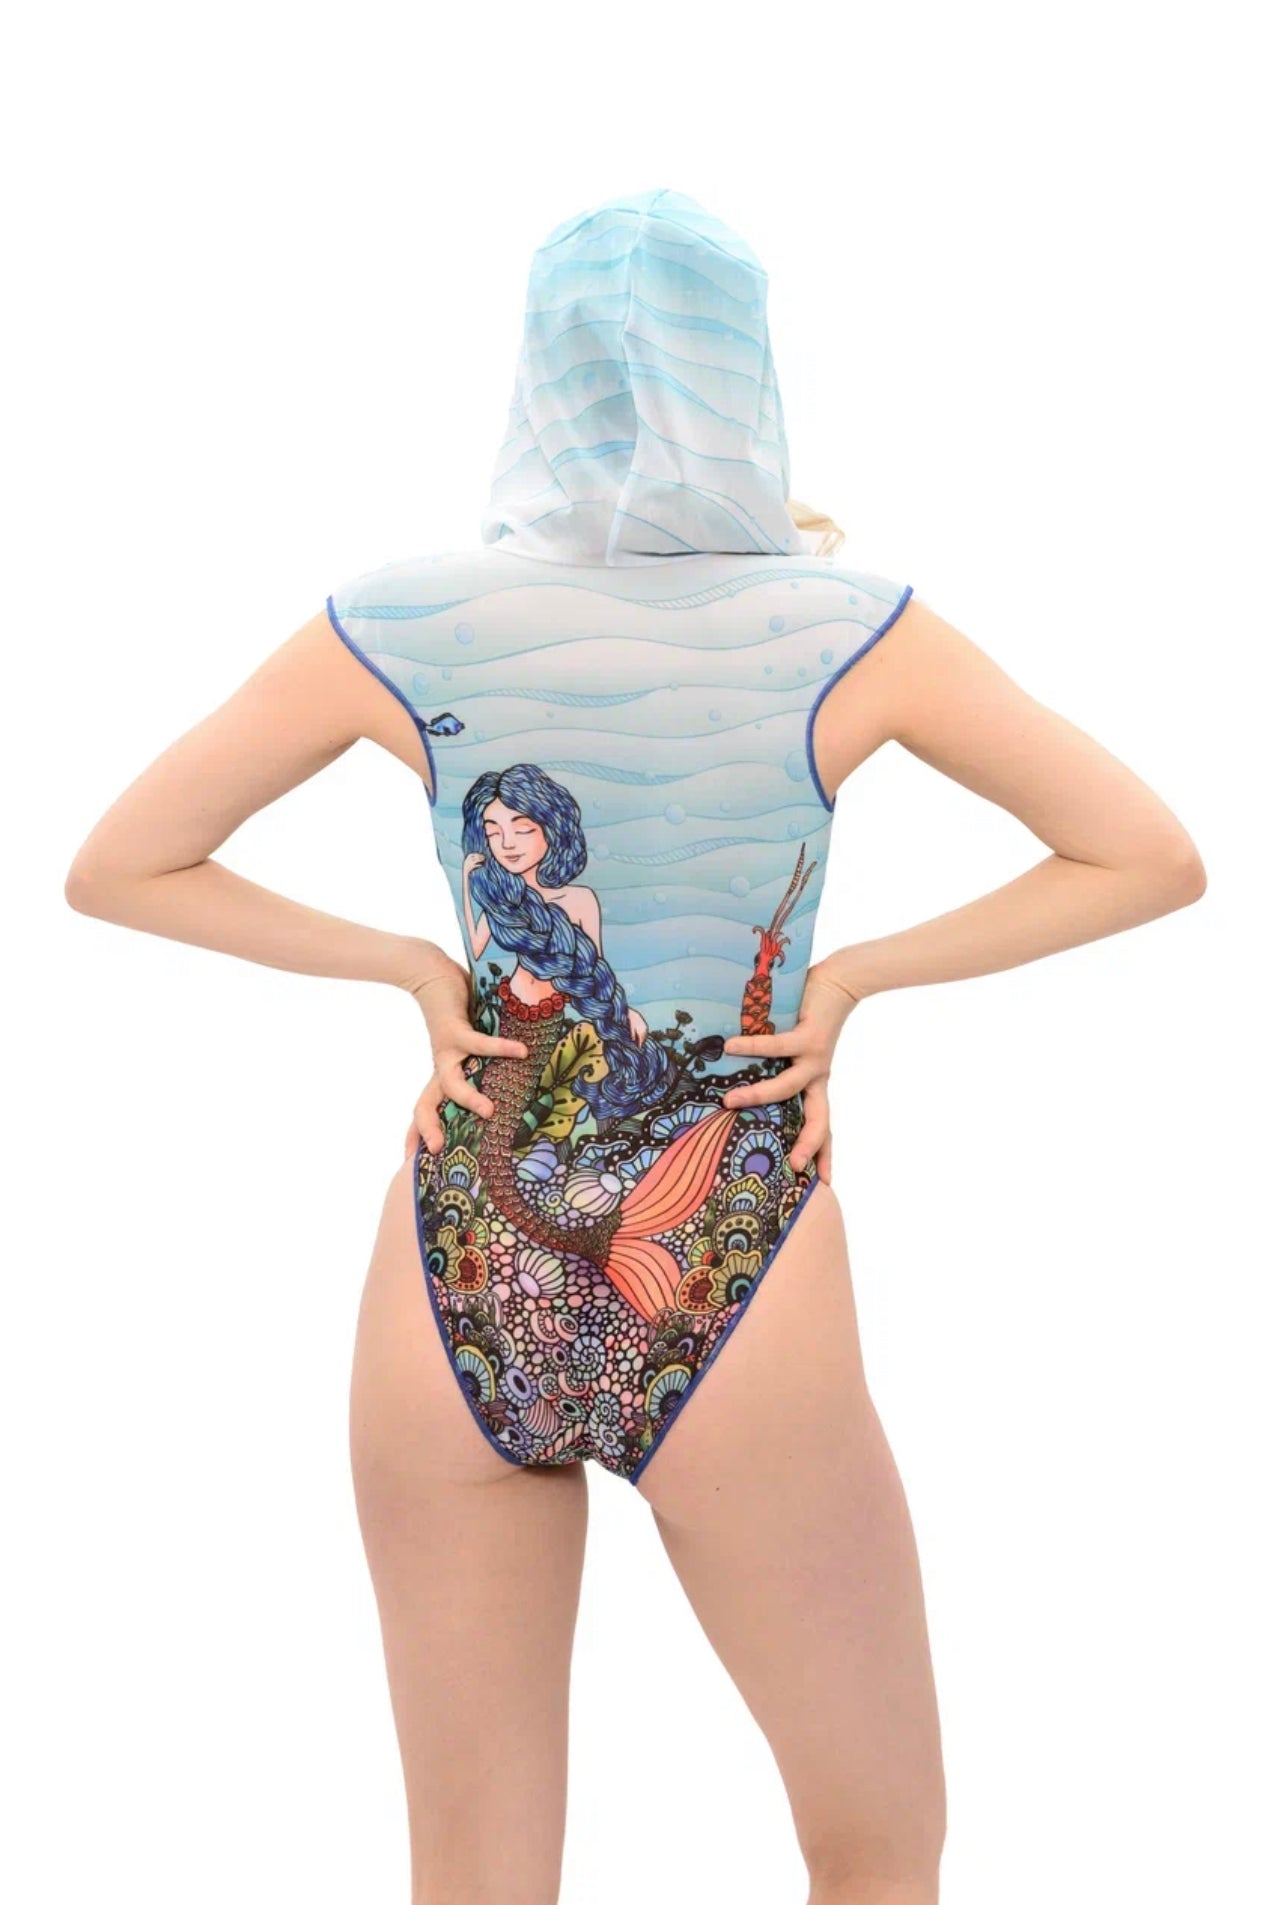 Explore our collection of sustainable tan-through swimsuits in a mermaids print. Each swimsuit features a unique design with a hood and lace, providing SPF35 protection. Experience classic luxury and shop now!